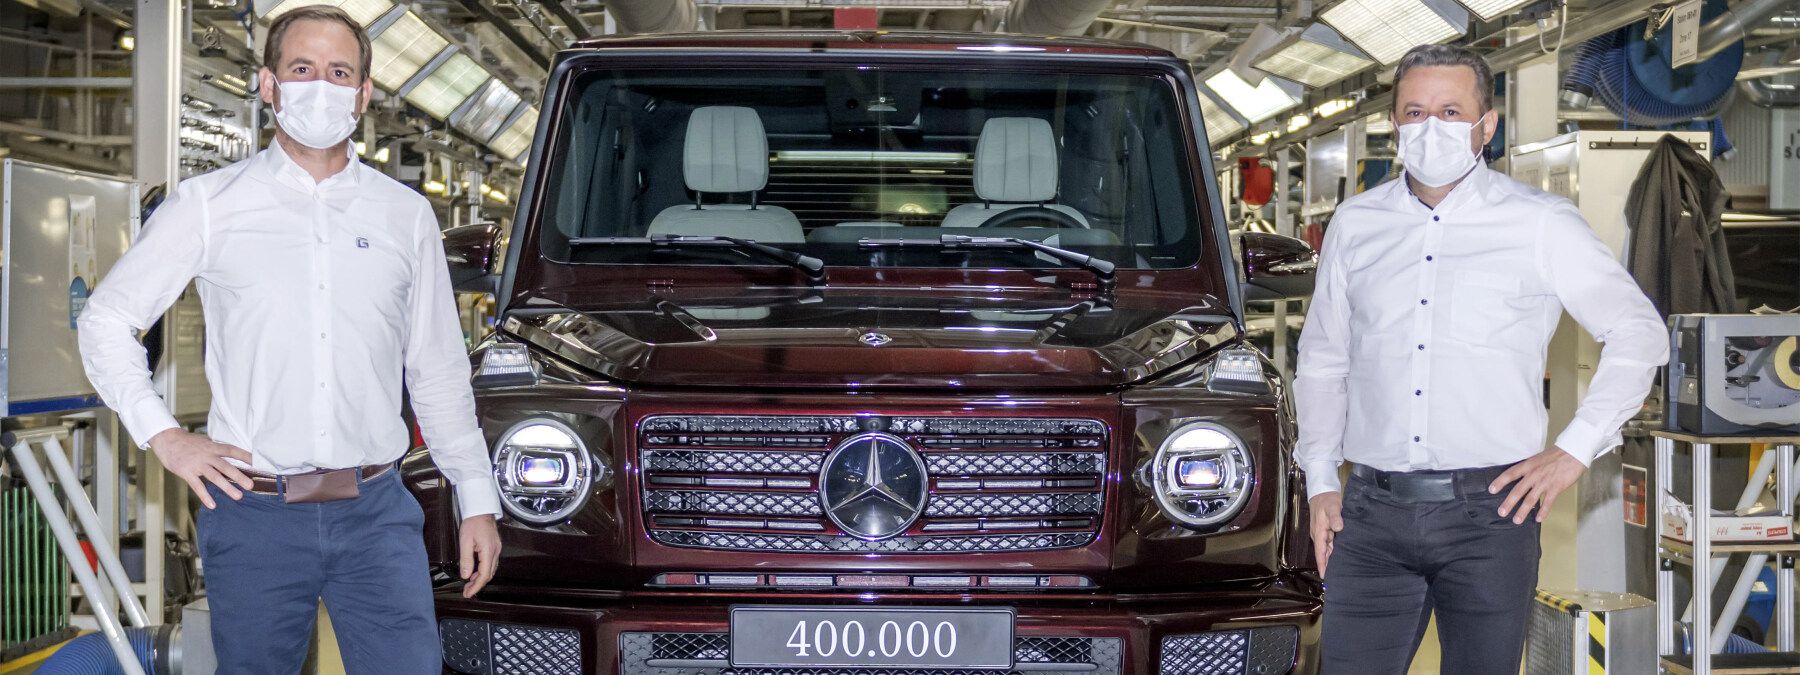 Mercedes Benz produces the 400,000th G-Wagen